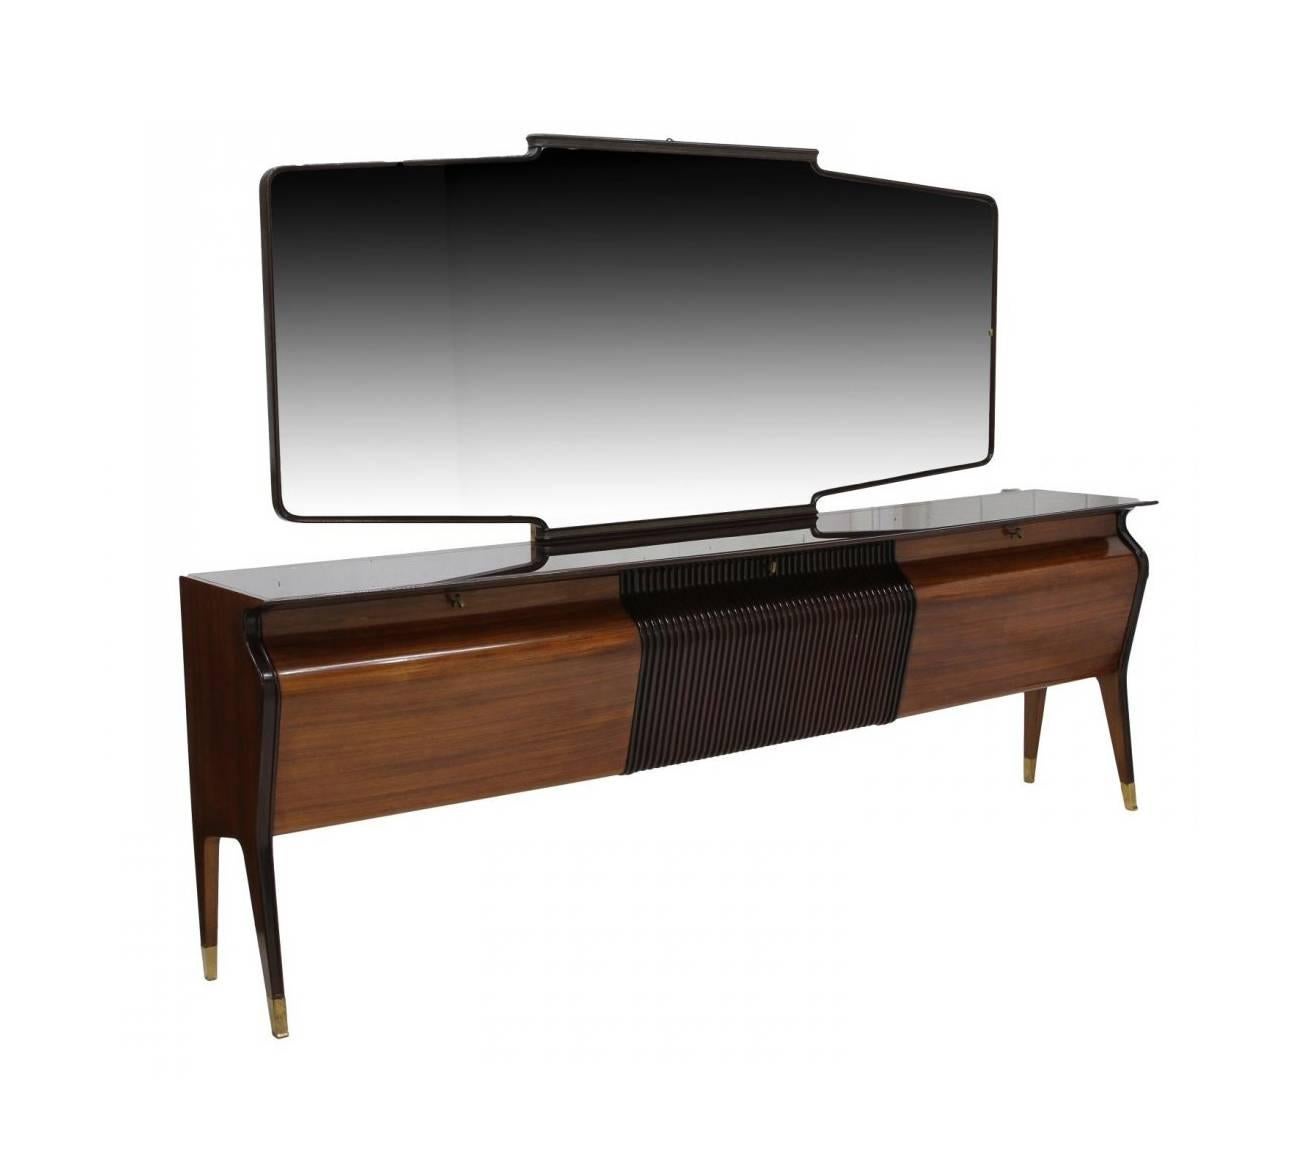 A very large and dramatic sideboard or credenza for dining room with a matching mirror, circa 1950s. In the style of Swiss Italian Osvaldo Borsani (1911-1985), the sideboard is made of rosewood in contrast with the ebonized central panel. It